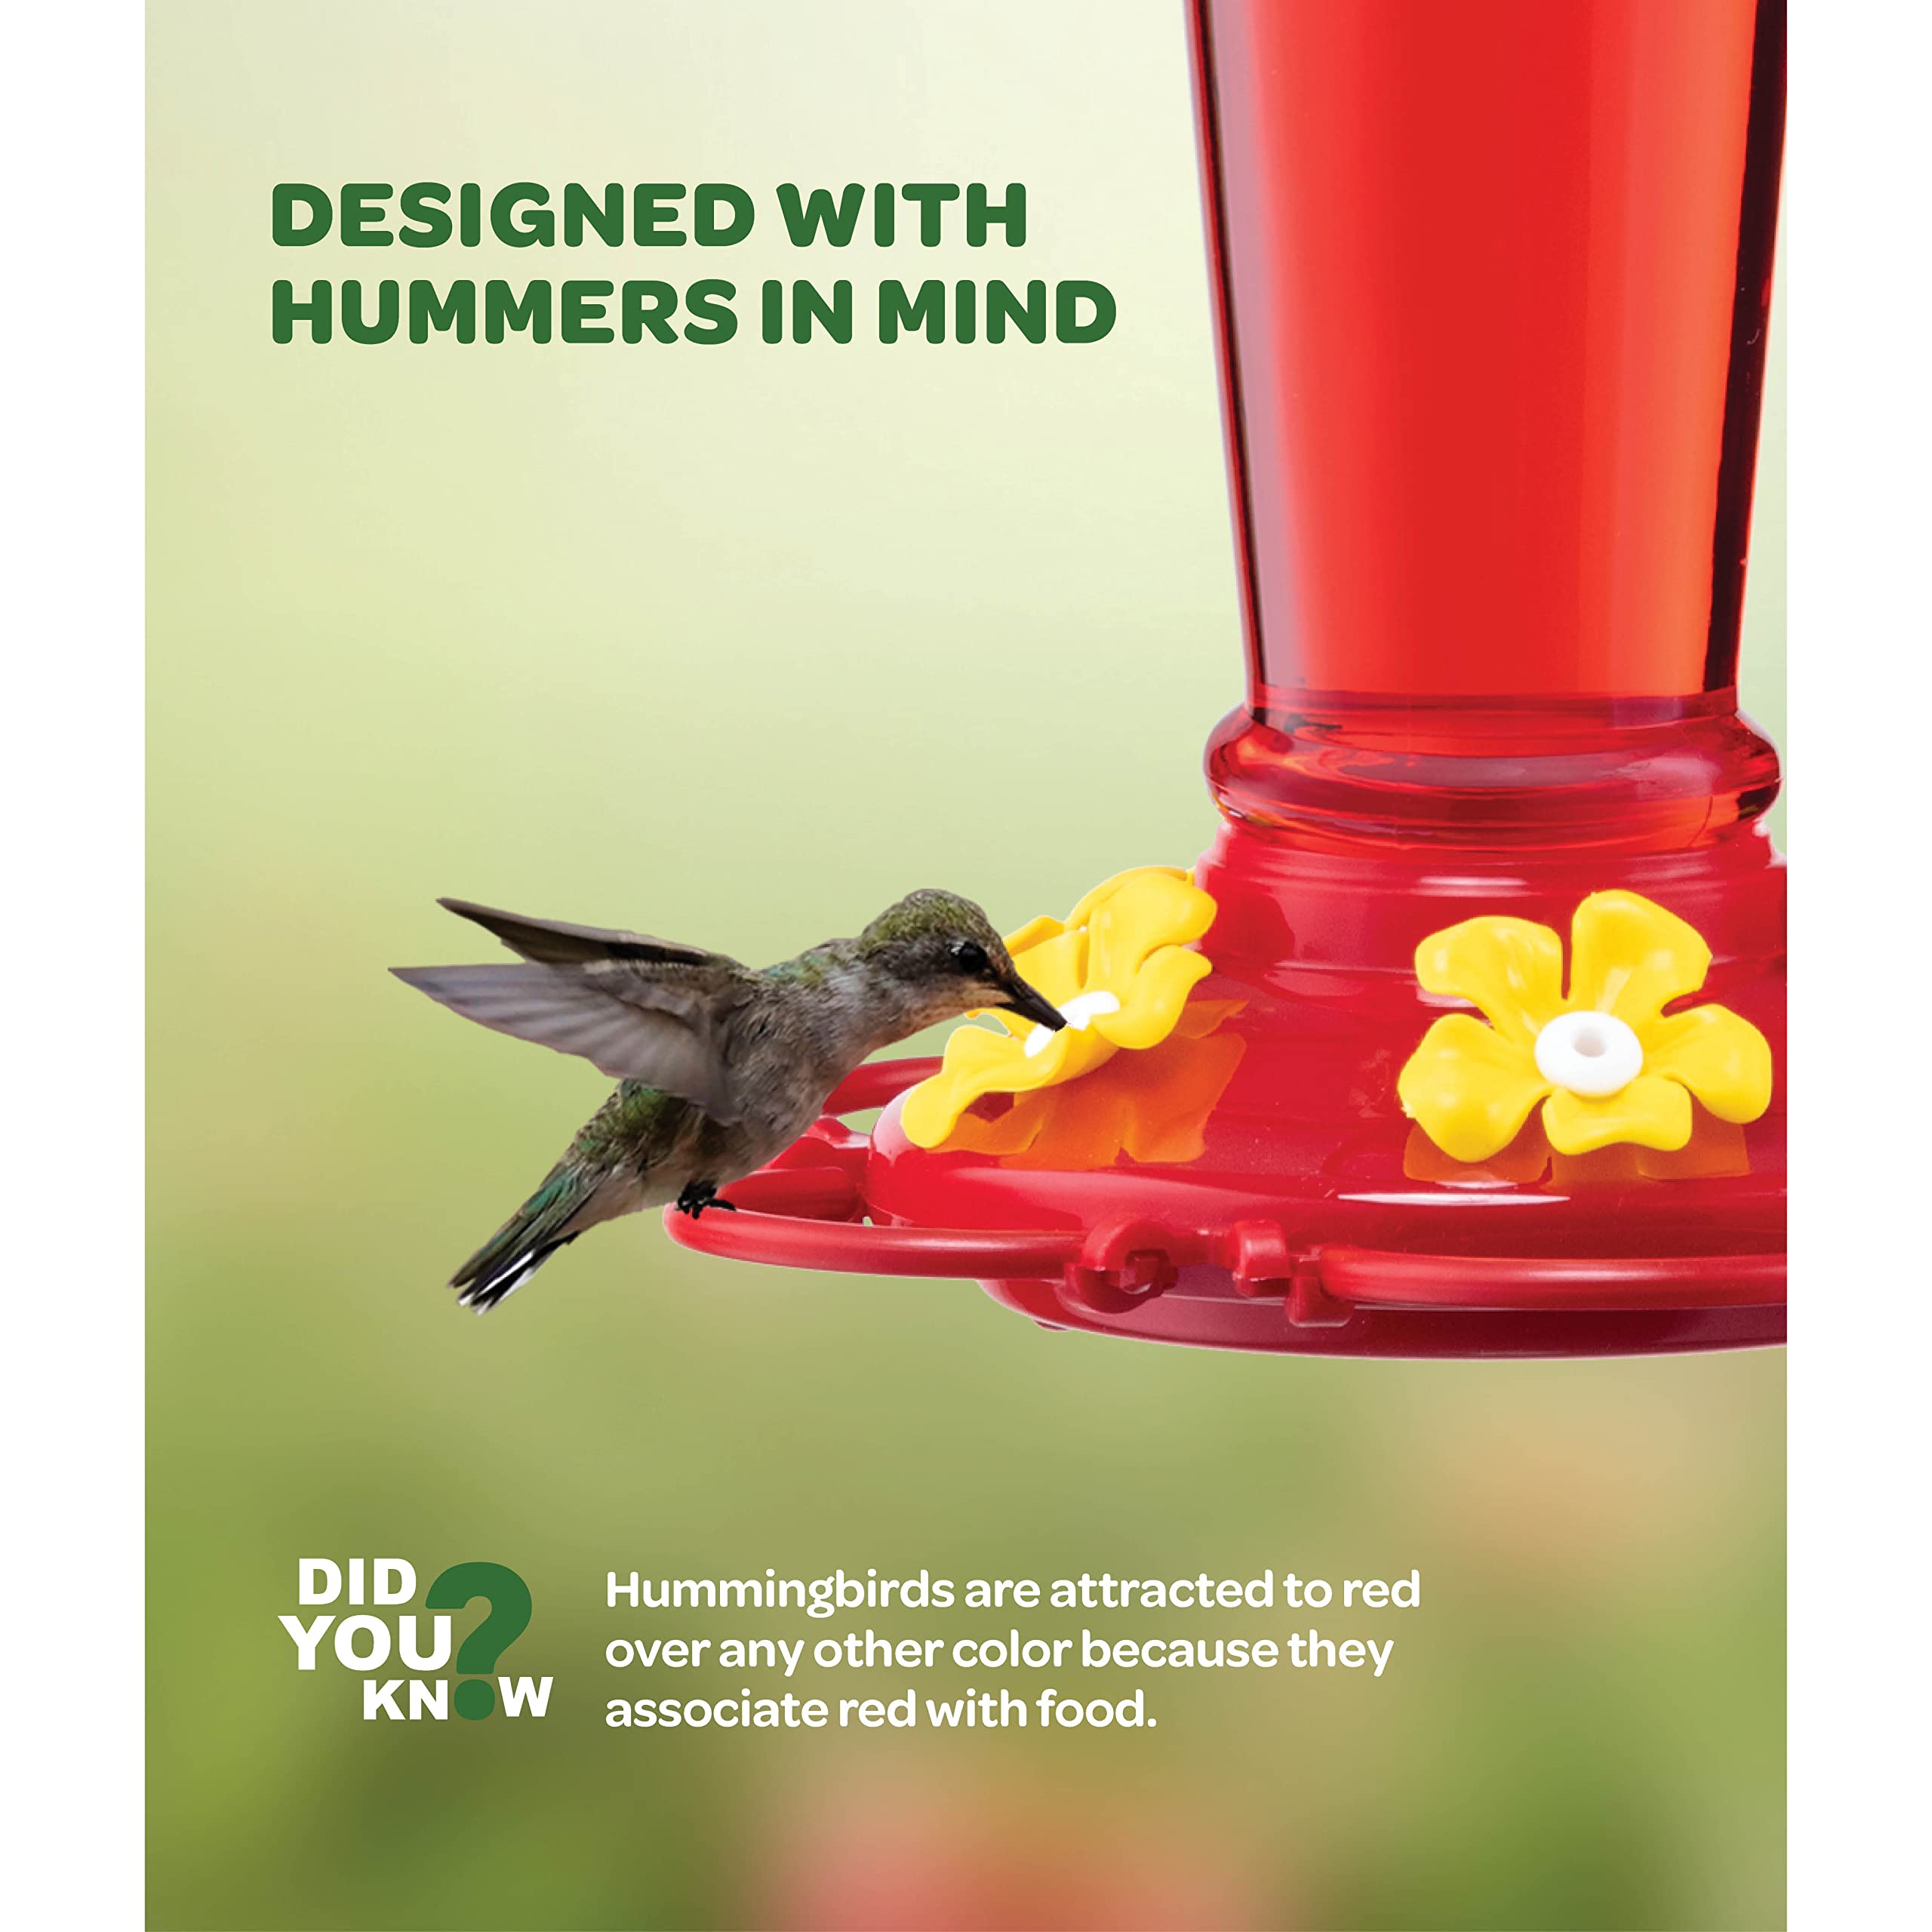 Hummingbird Feeder 10 oz [Set of 2] Plastic Feeders for Outdoors, with Built-in Ant Guard - Circular Perch with 5 Feeding Ports - Wide Mouth for Easy Filling/2 Part Base for Easy Cleaning  - Very Good